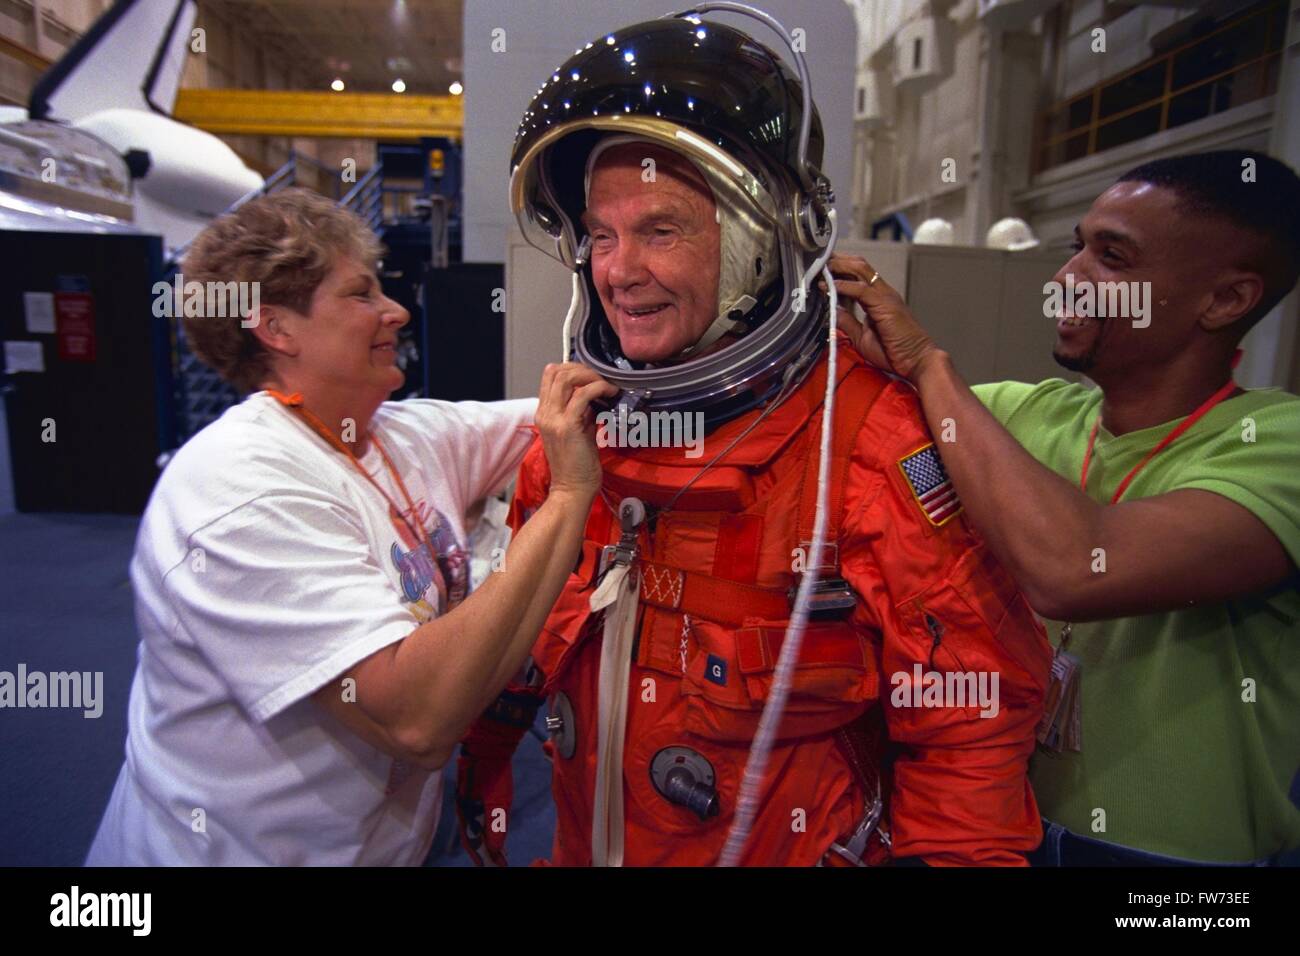 U.S. Senator and astronaut John Glenn is assisted in suiting up for a training exercise at the systems integration facility at the Johnson Space Center April 28, 1998 in Houston, Texas. Glenn who first flew in space in 1962 is scheduled to join the Space Shuttle Discovery STS-95 flight. Stock Photo